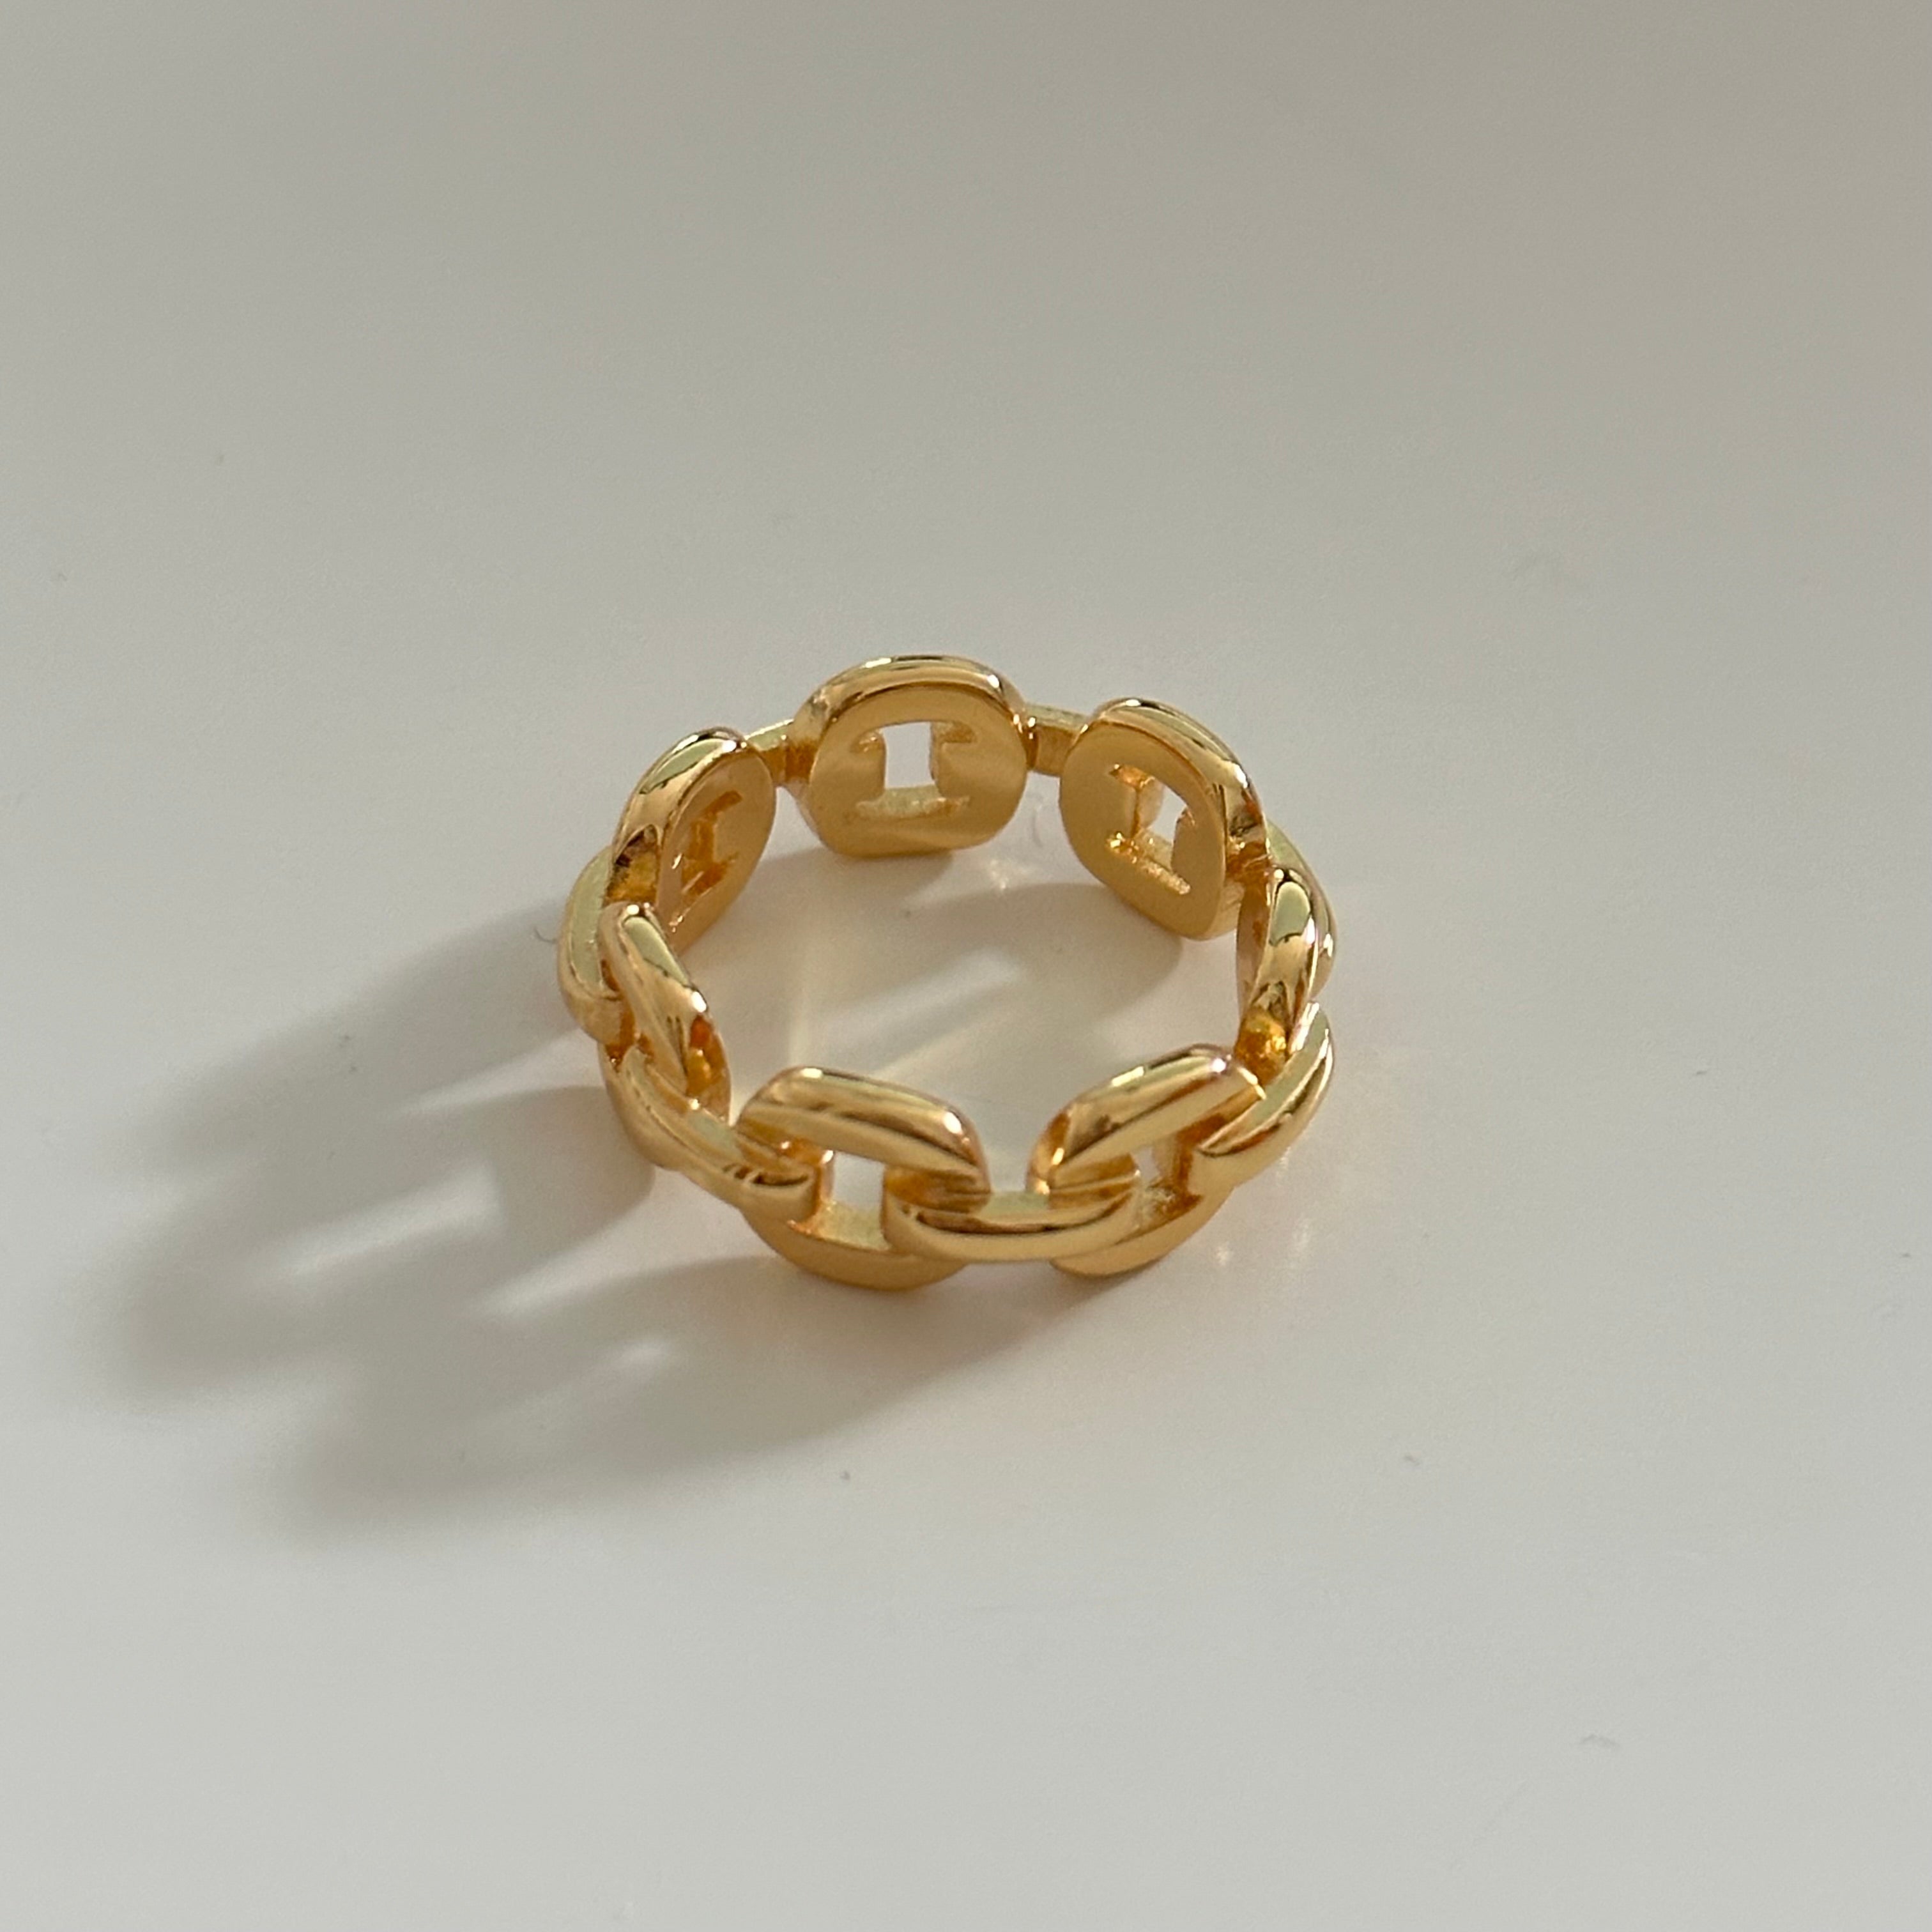 Statement Links Ring in 18k Gold Plated Brass - The Azora Ring